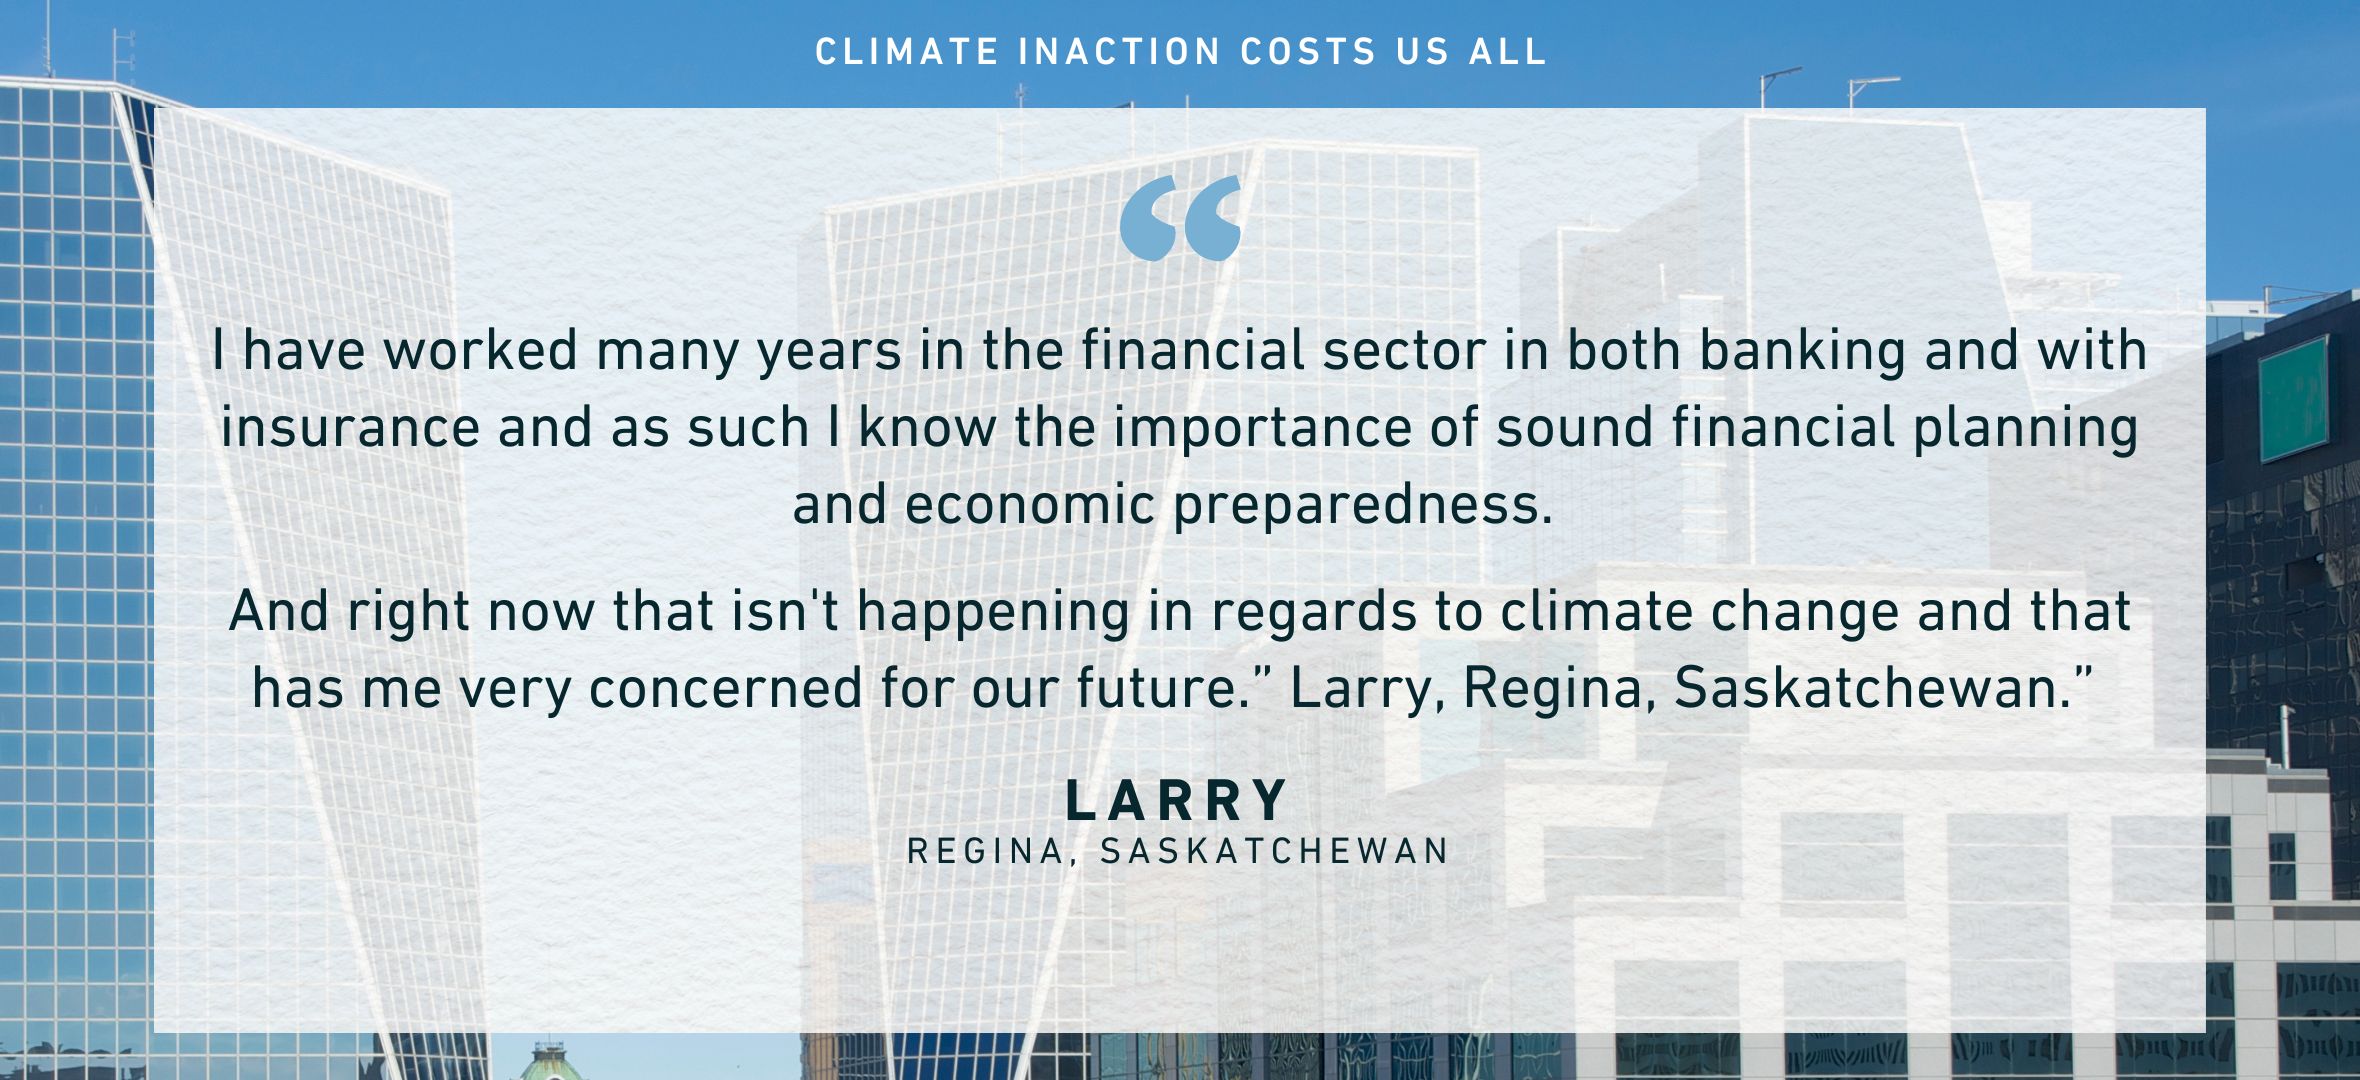 I have worked many years in the financial sector in both banking and with insurance and as such I know the importance of sound financial planning and economic preparedness. And right now that isn't happening in regards to climate change and that has me very concerned for our future.” Larry, Regina, Saskatchewan.”